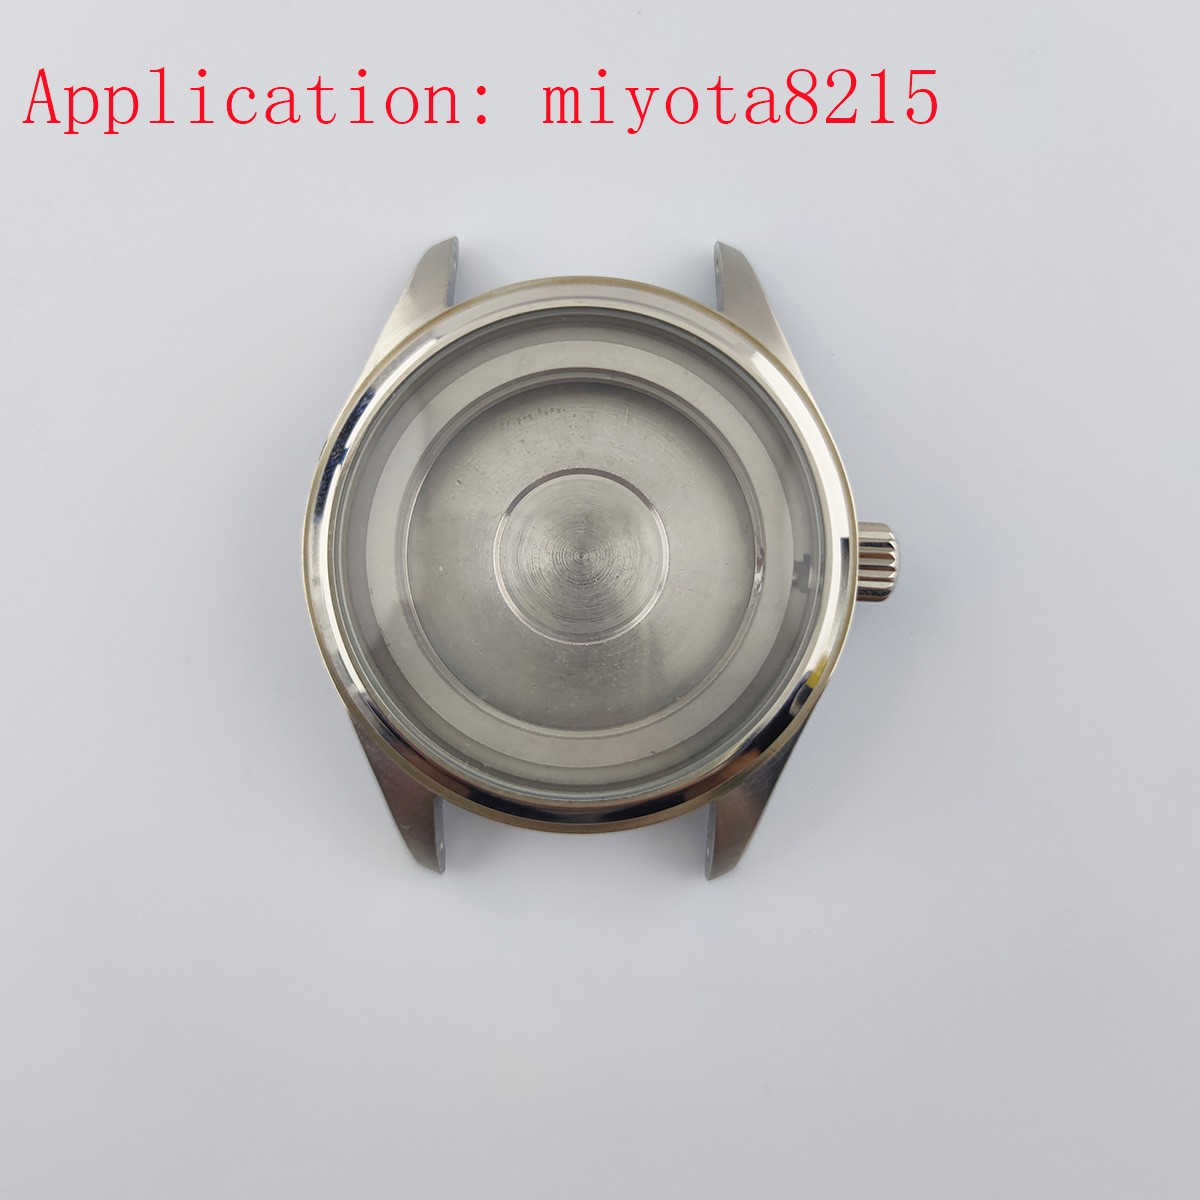 39mm case for miyota8215 movement sapphire glass stainless steel waterproof watch replacement parts